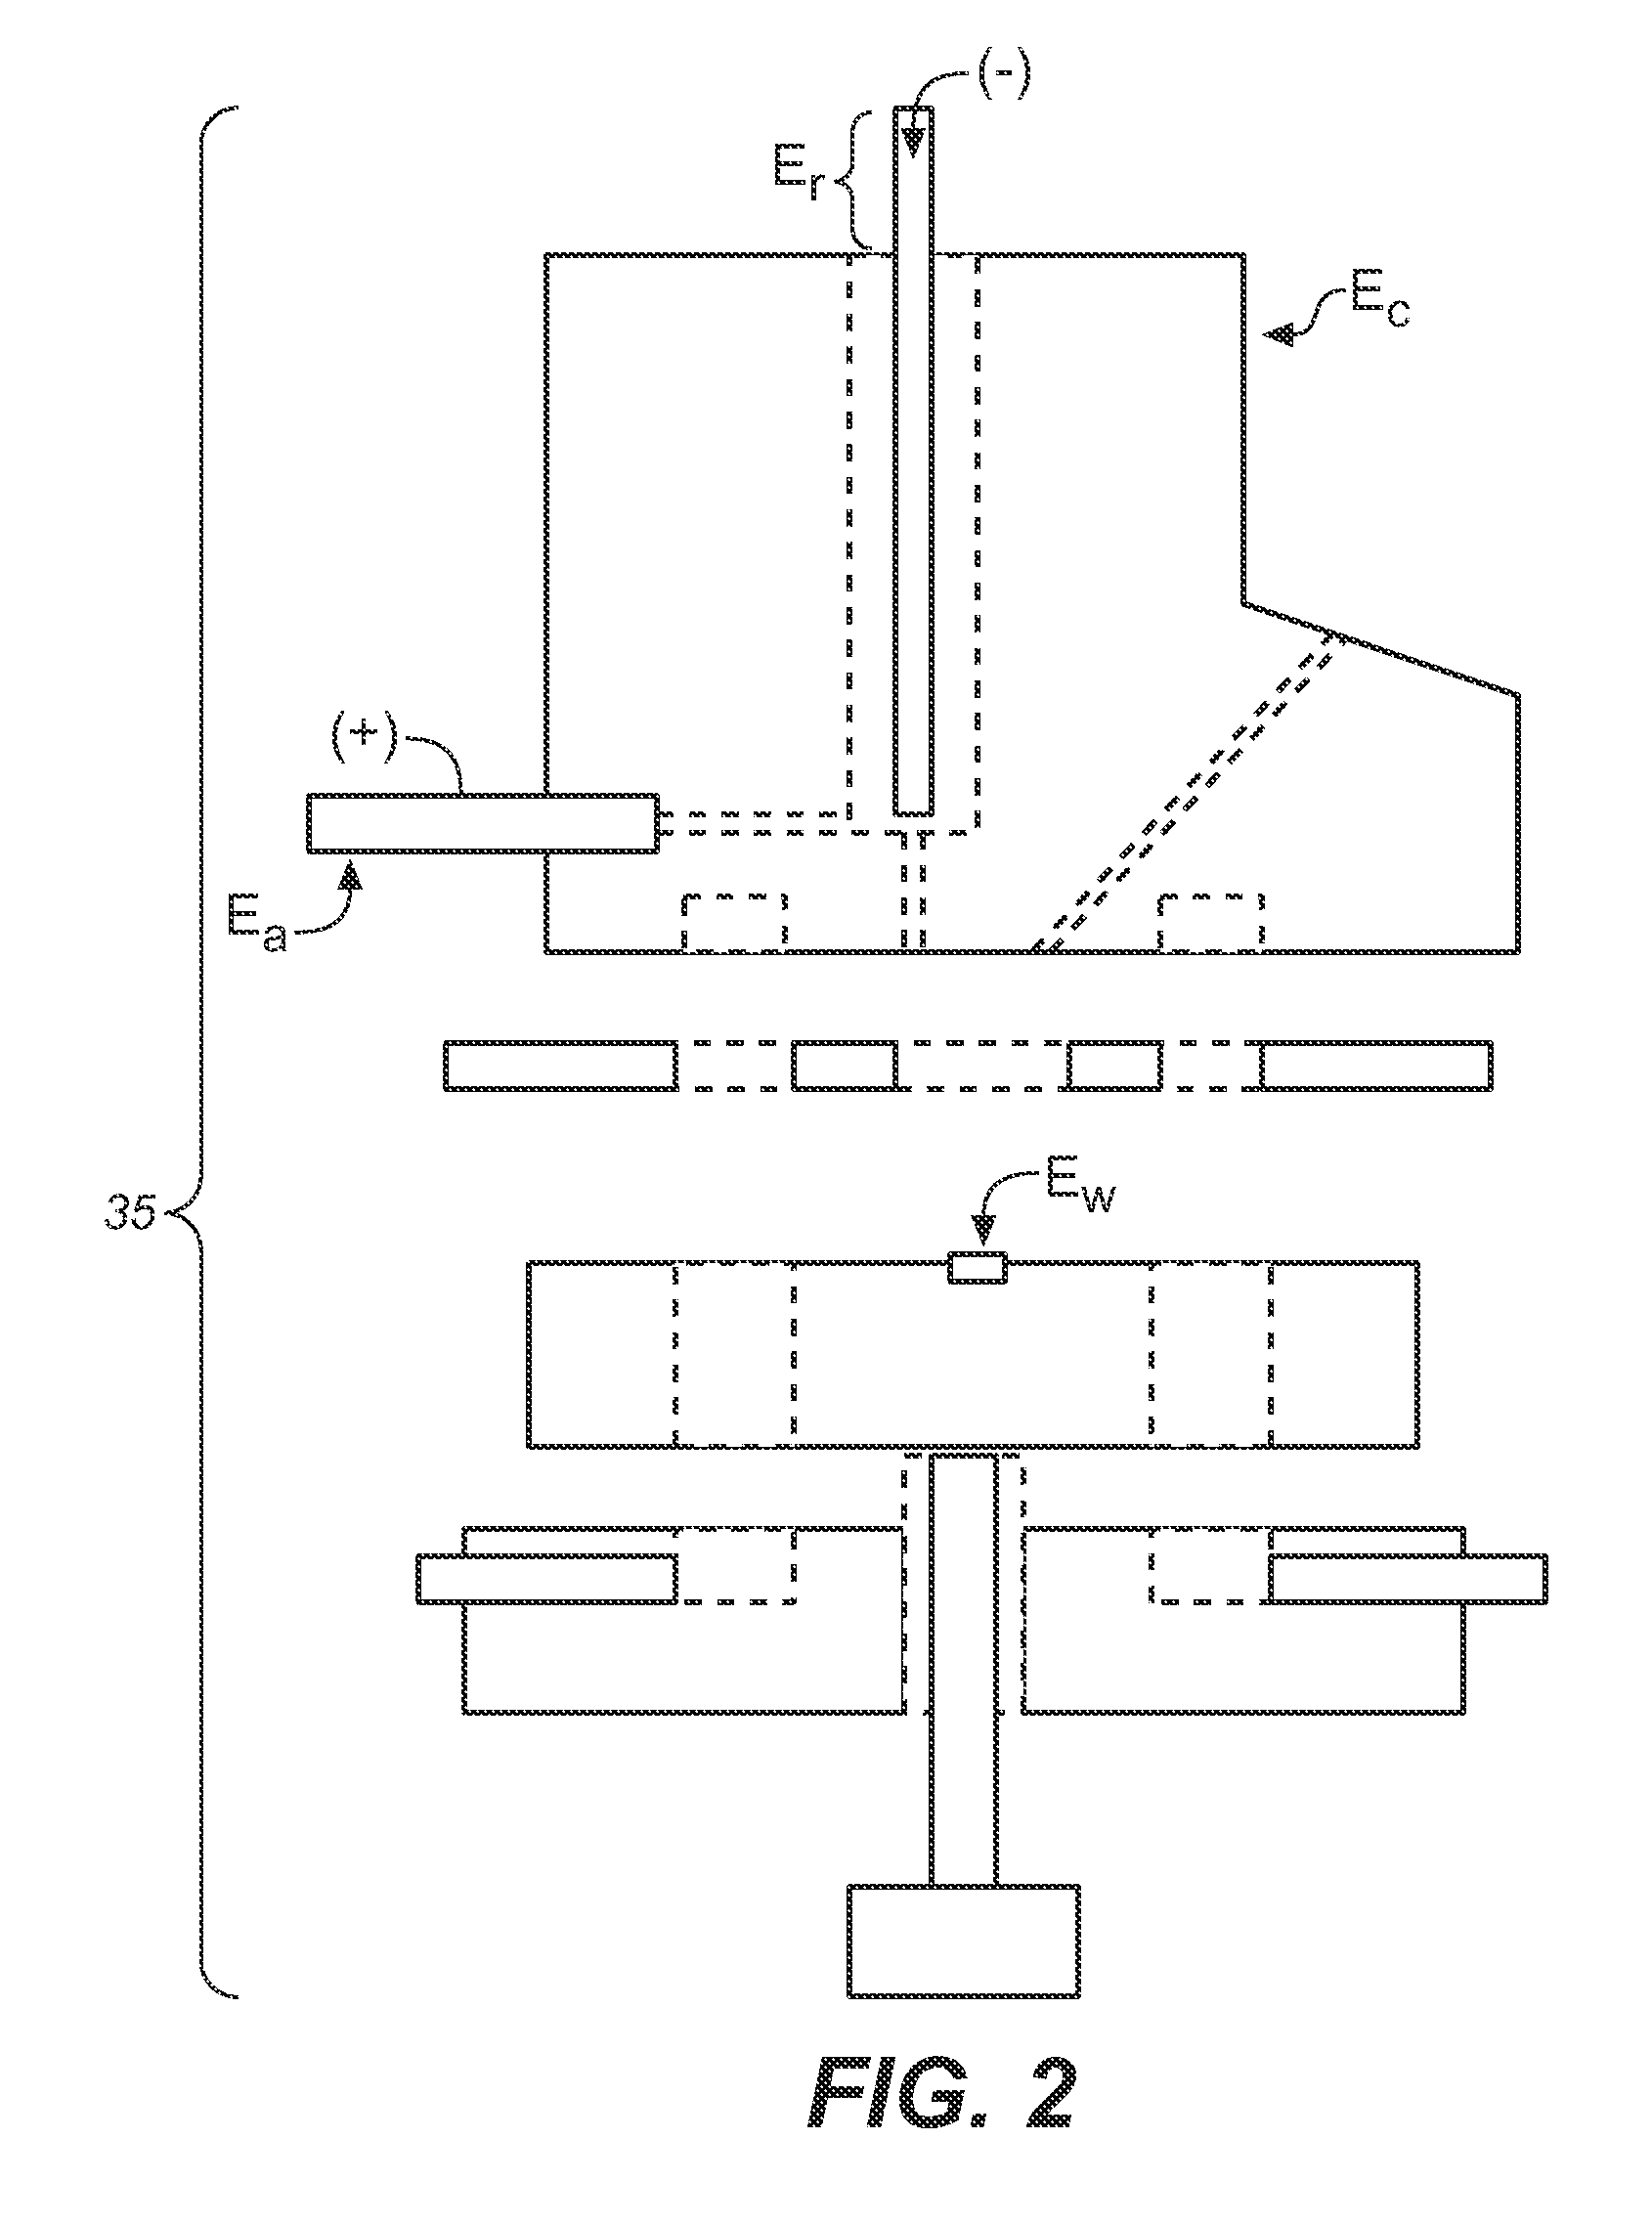 Analytic Device With PhotoVoltaic Power Source